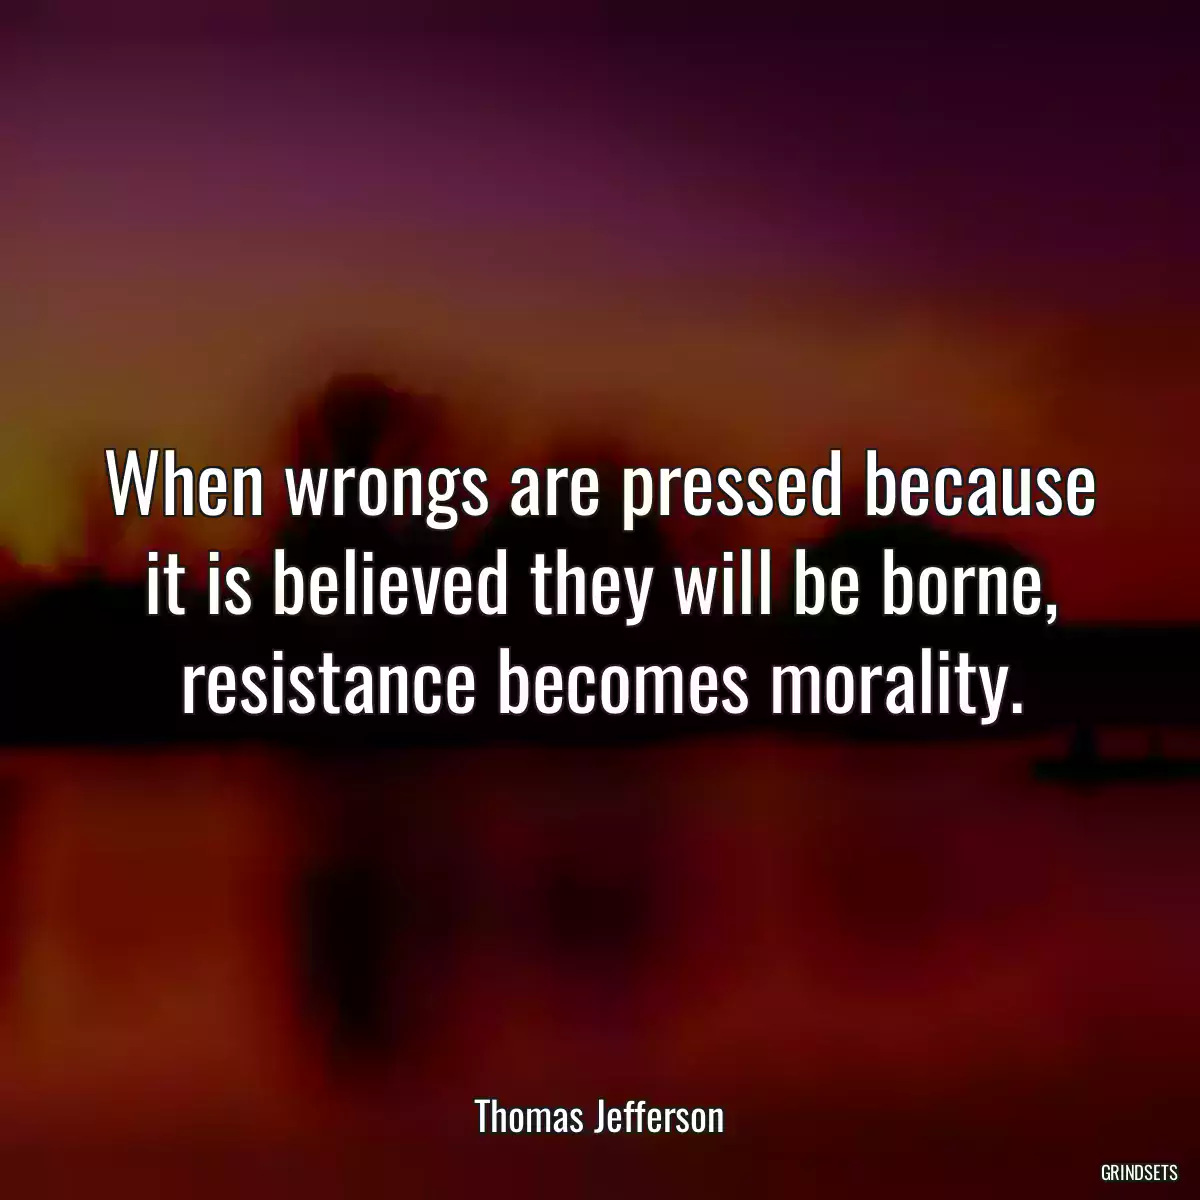 When wrongs are pressed because it is believed they will be borne, resistance becomes morality.